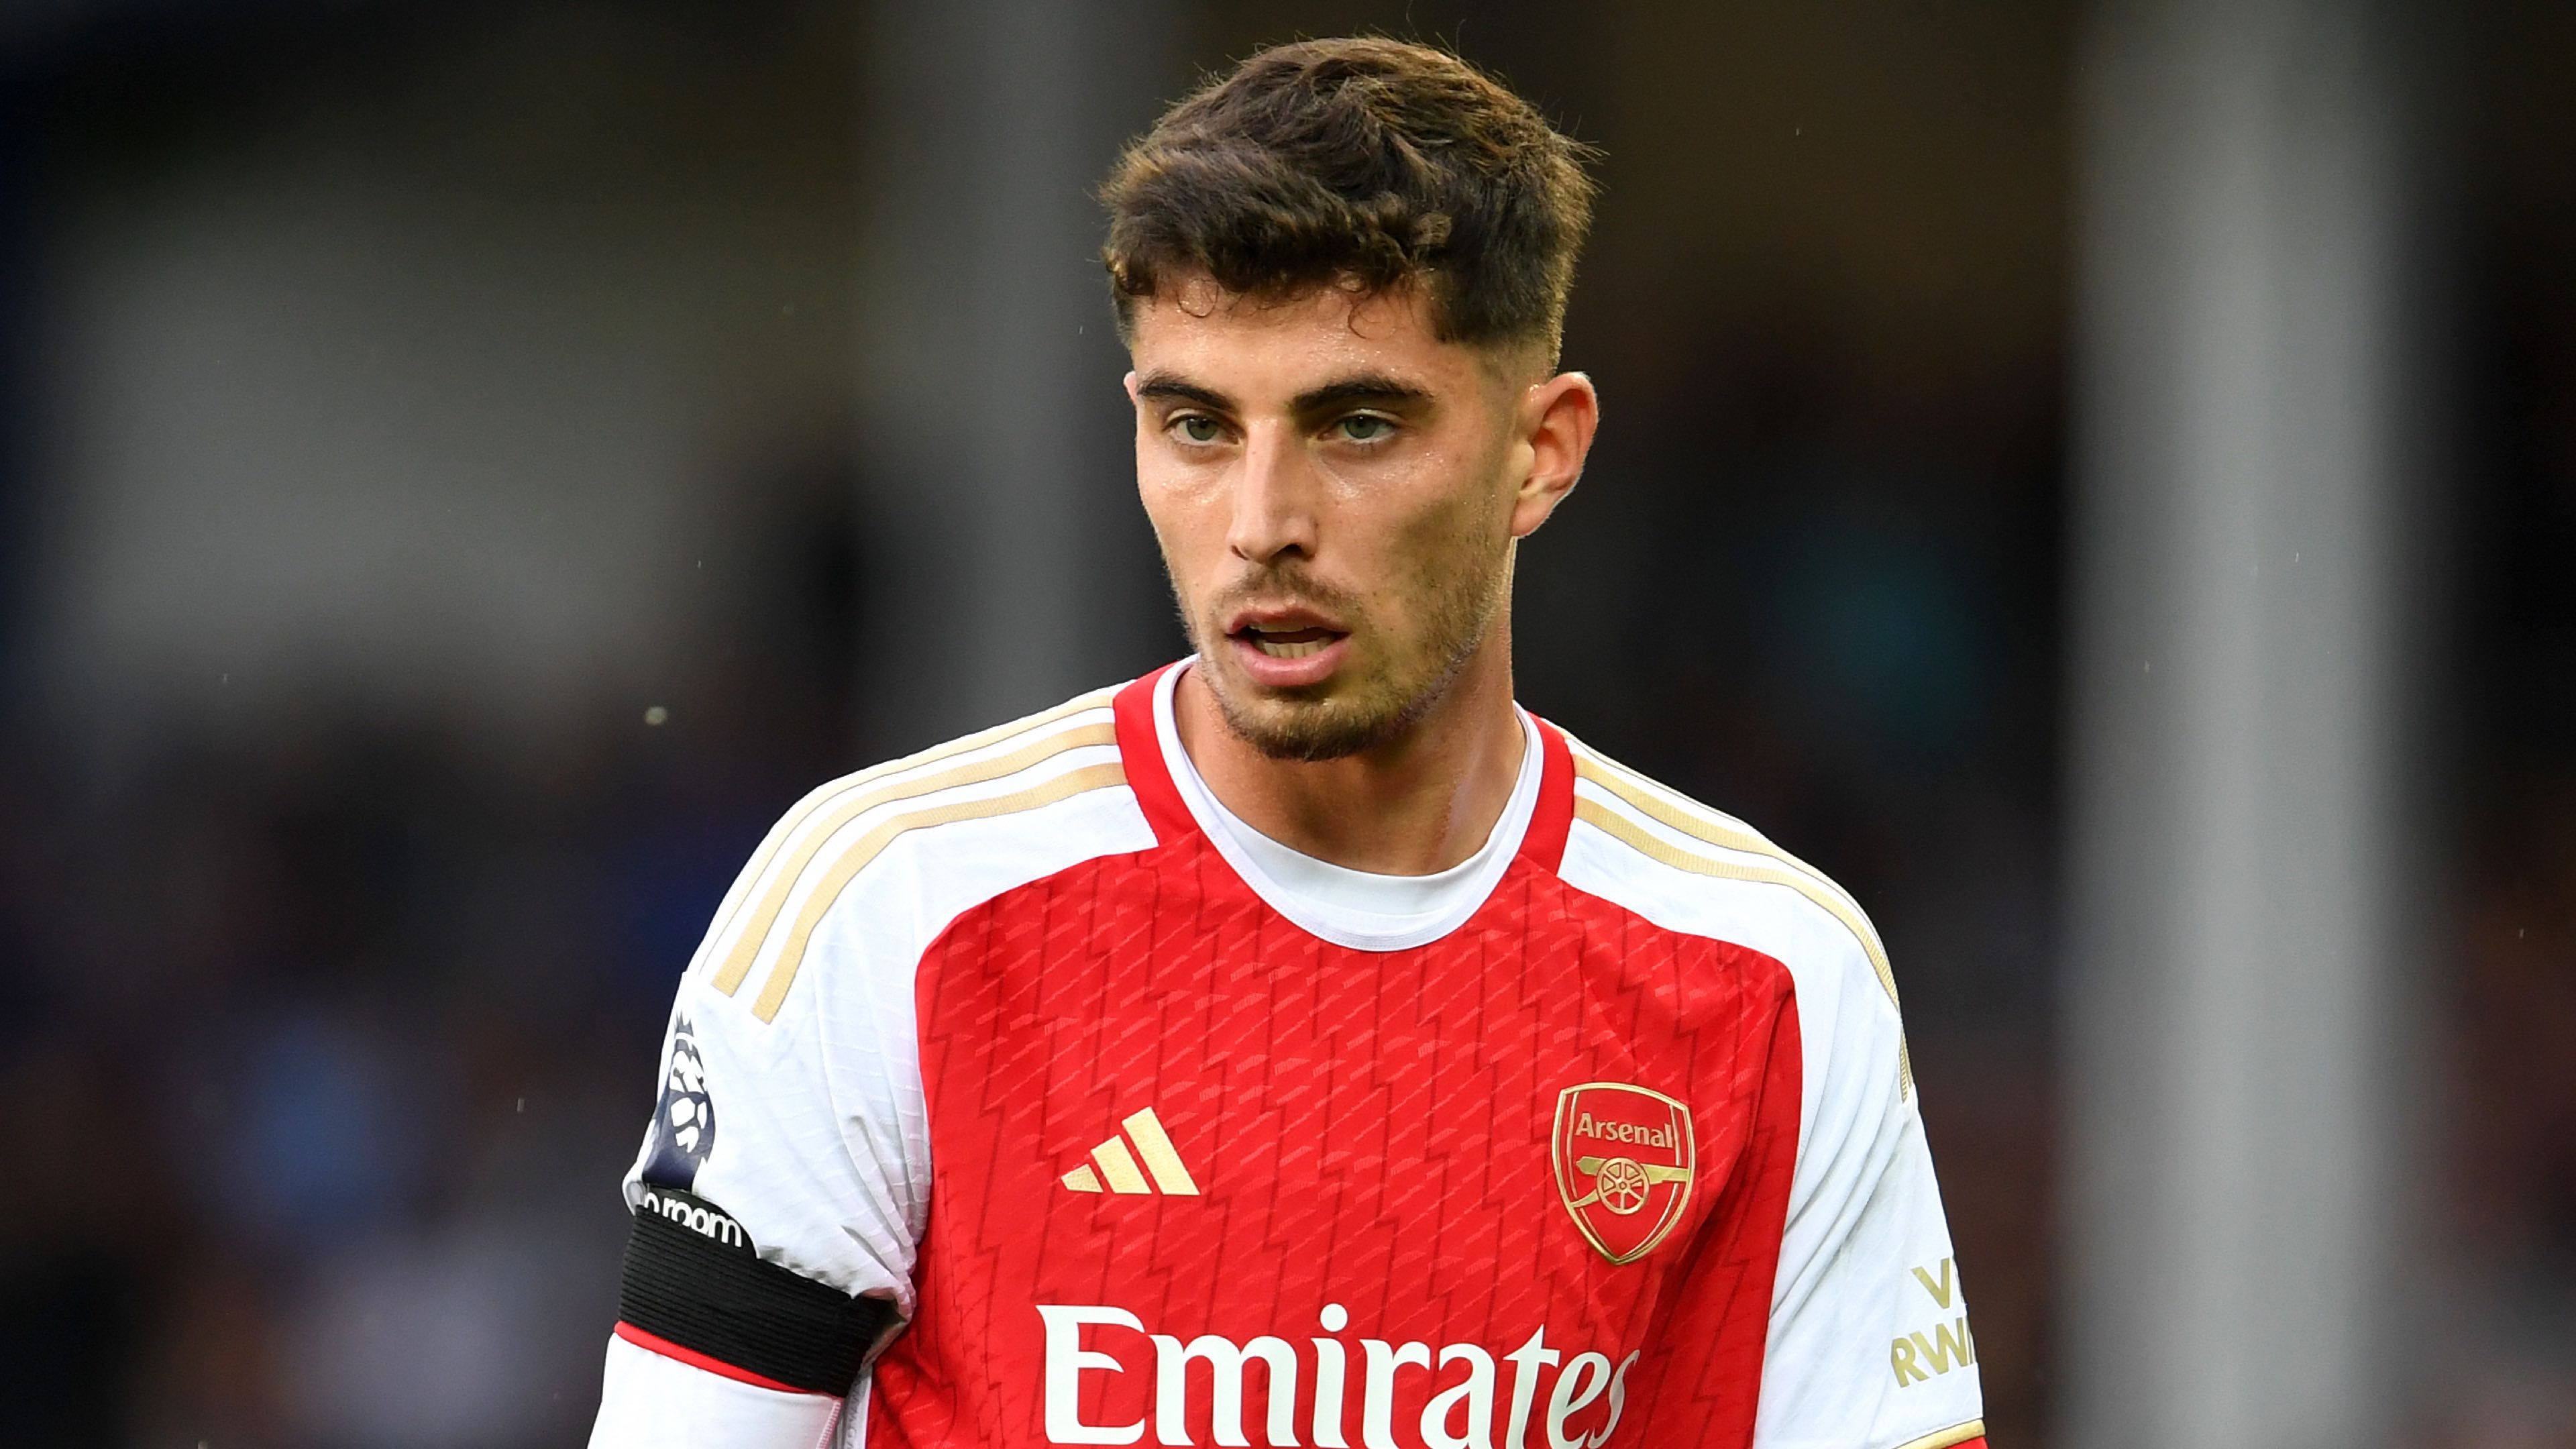  Kai Havertz, a German midfielder who plays for Chelsea, is a popular choice for Fantasy Premier League managers in Gameweek 34.